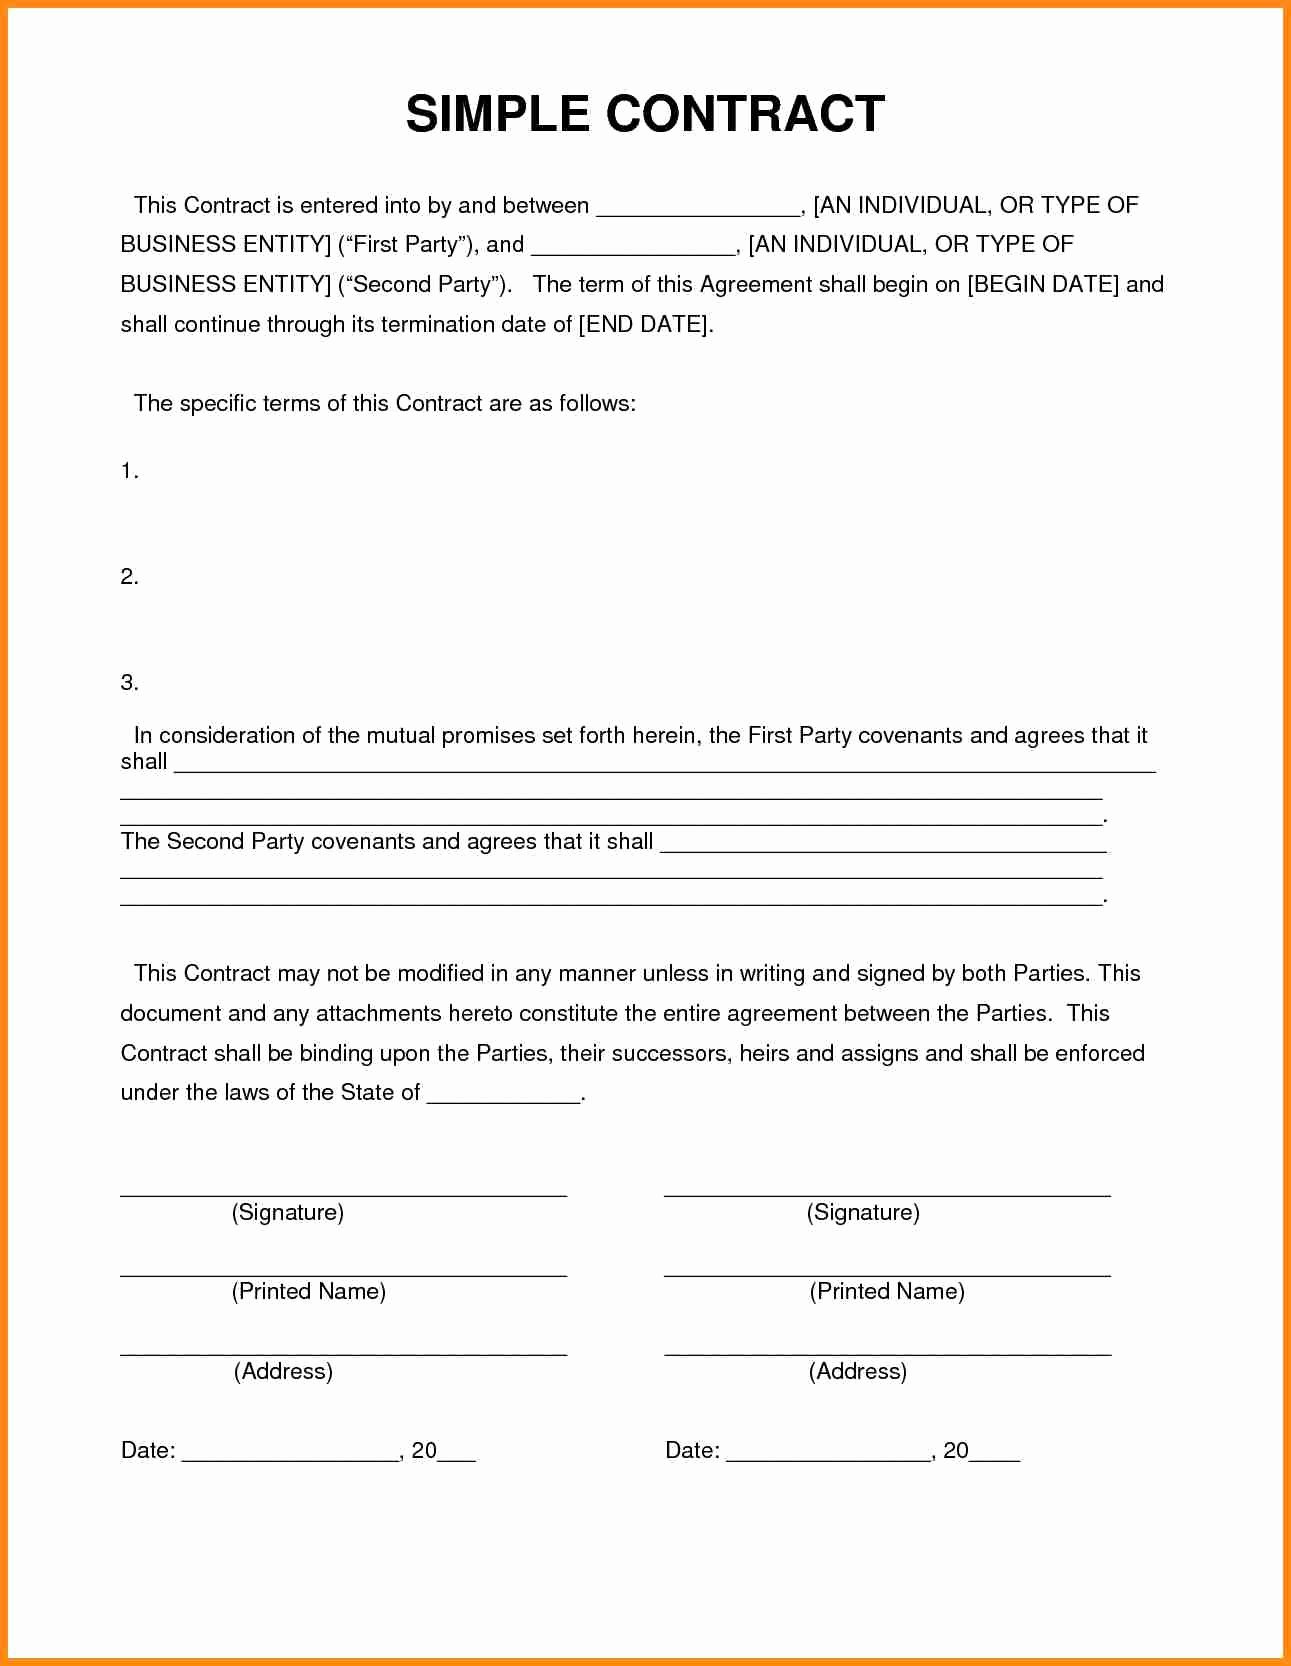 Simple Partnership Agreement Template Fresh Simple Contract Agreement